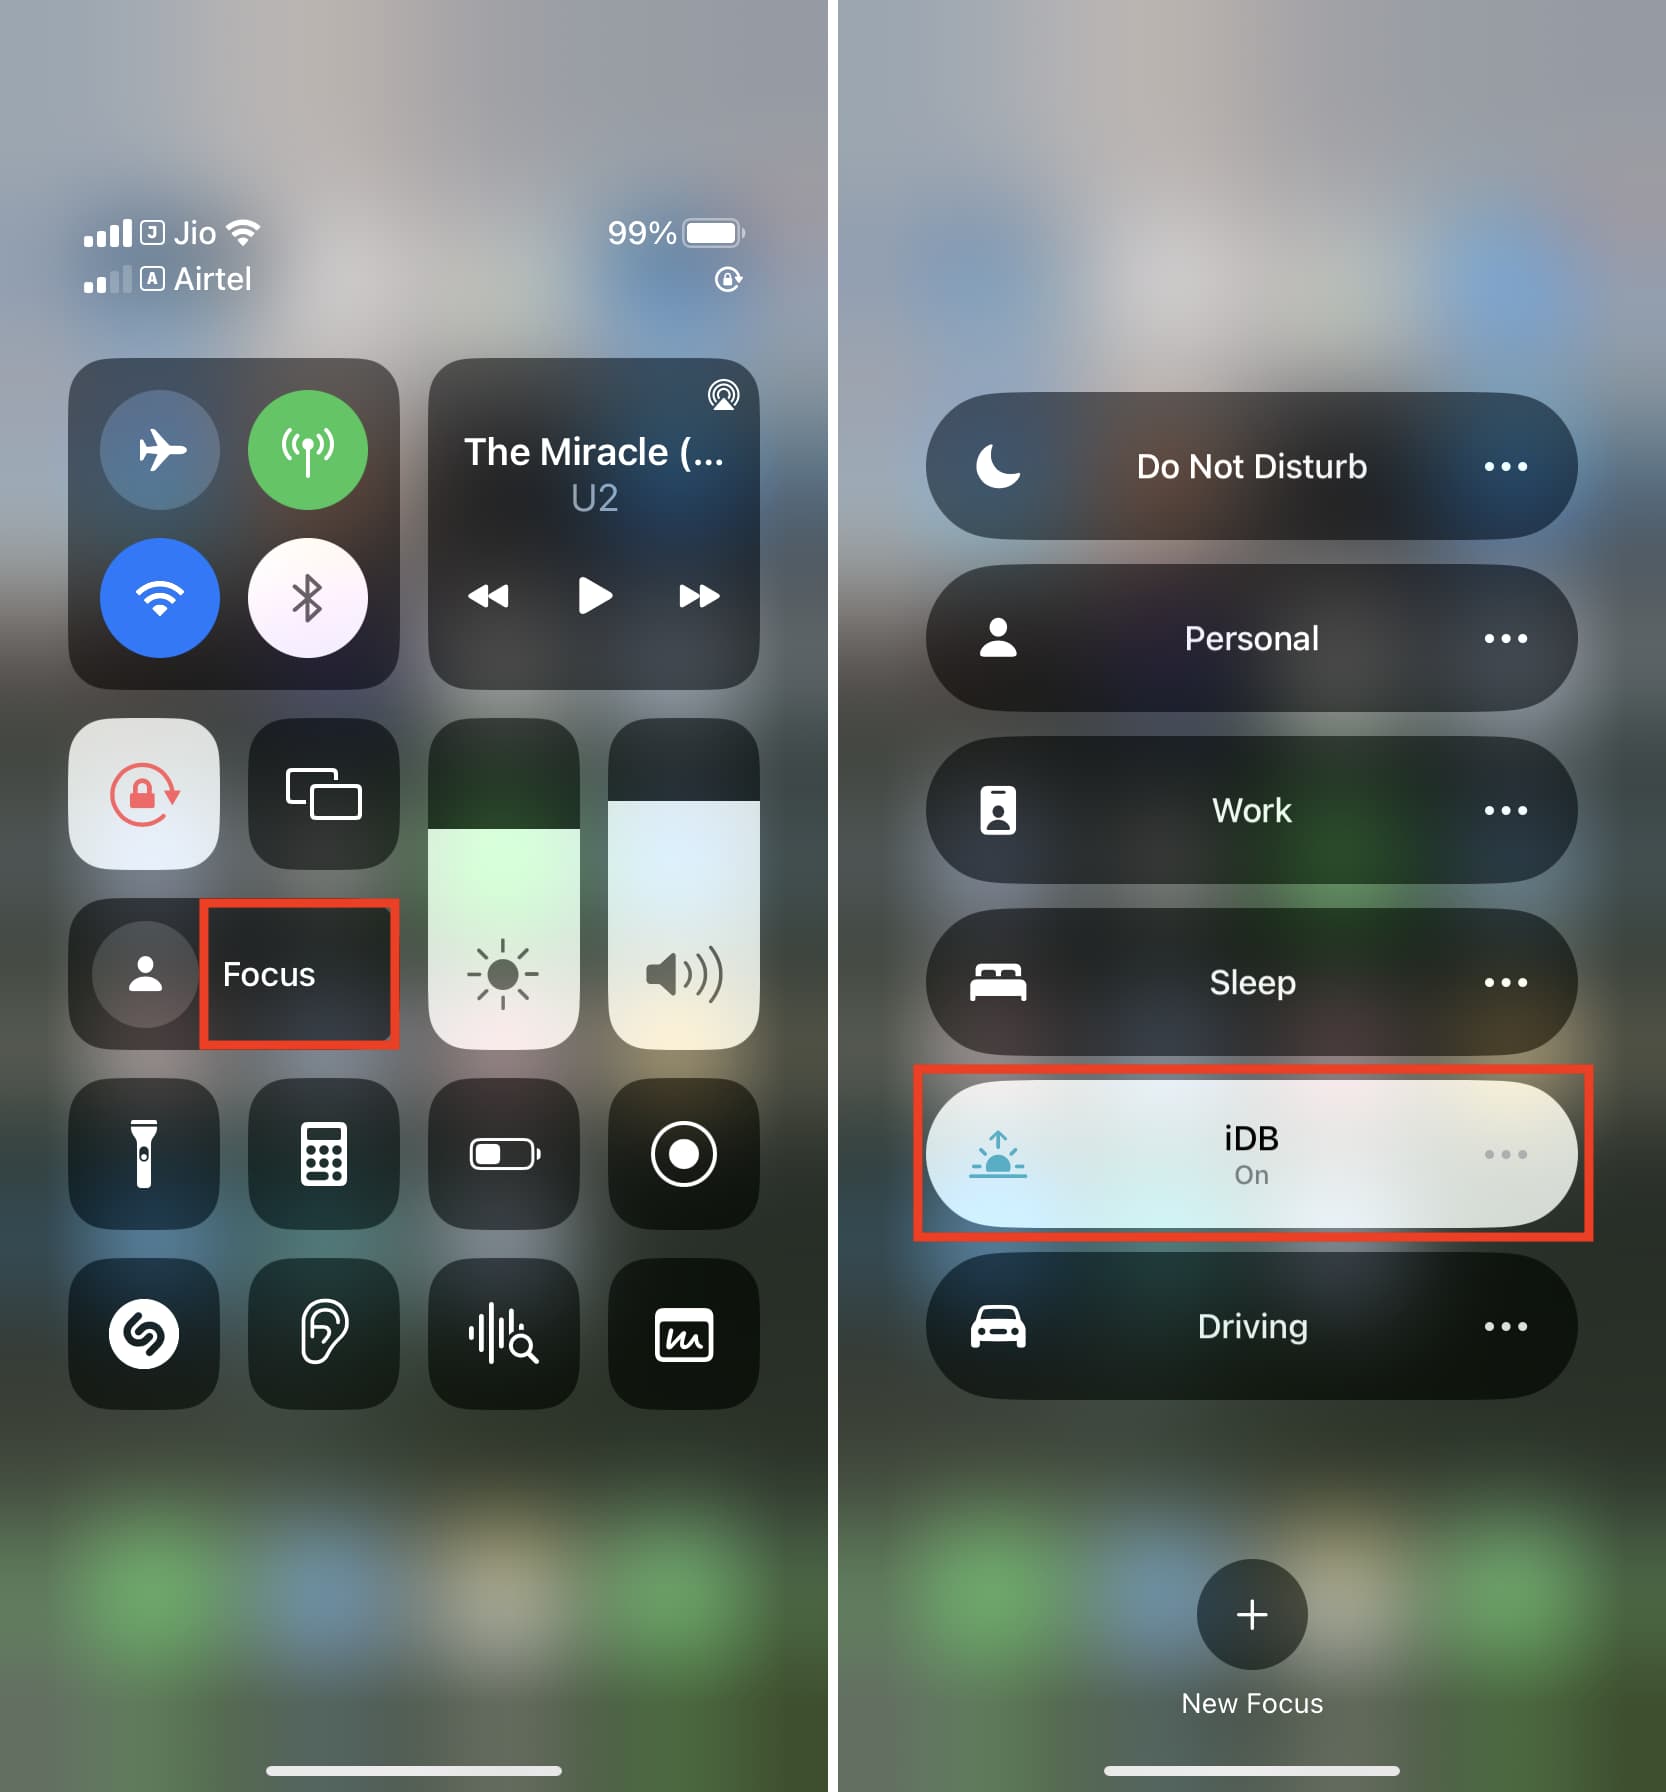 Enable Focus mode on iPhone from Control Center